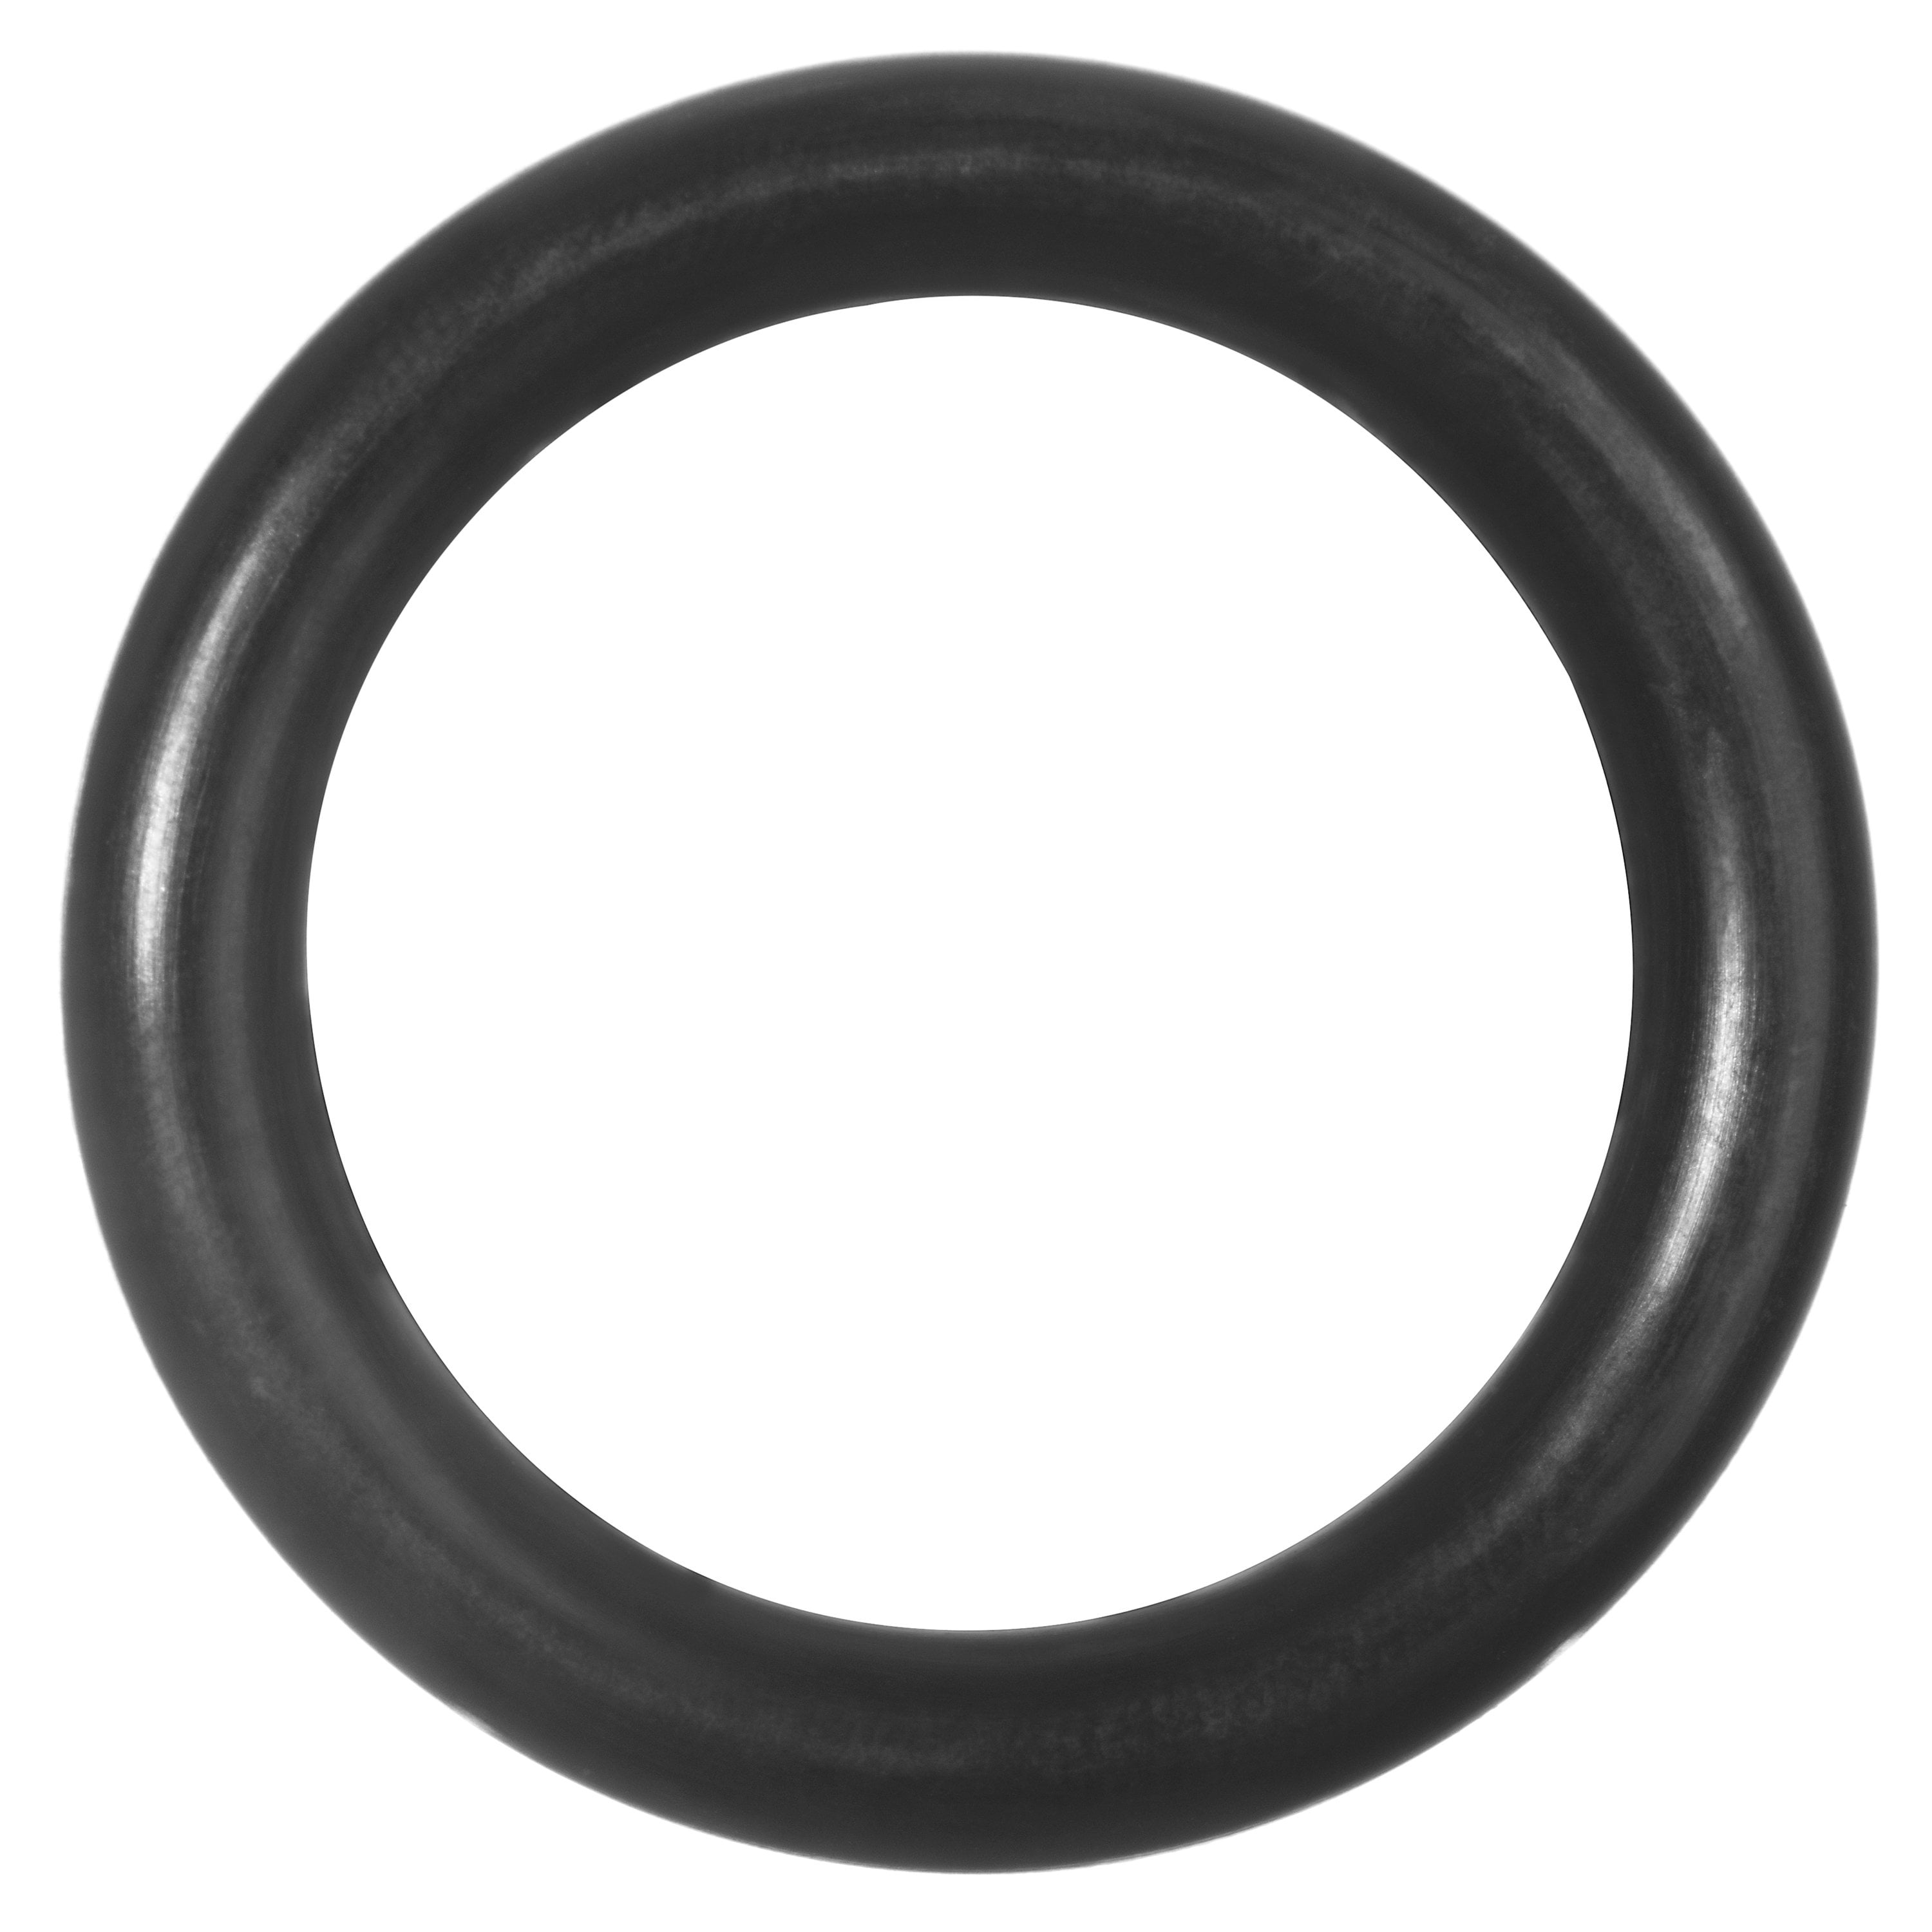 USA Sealing Inc Buna-N O-Ring-1.9mm Wide 5.8mm ID-Pack of 100 